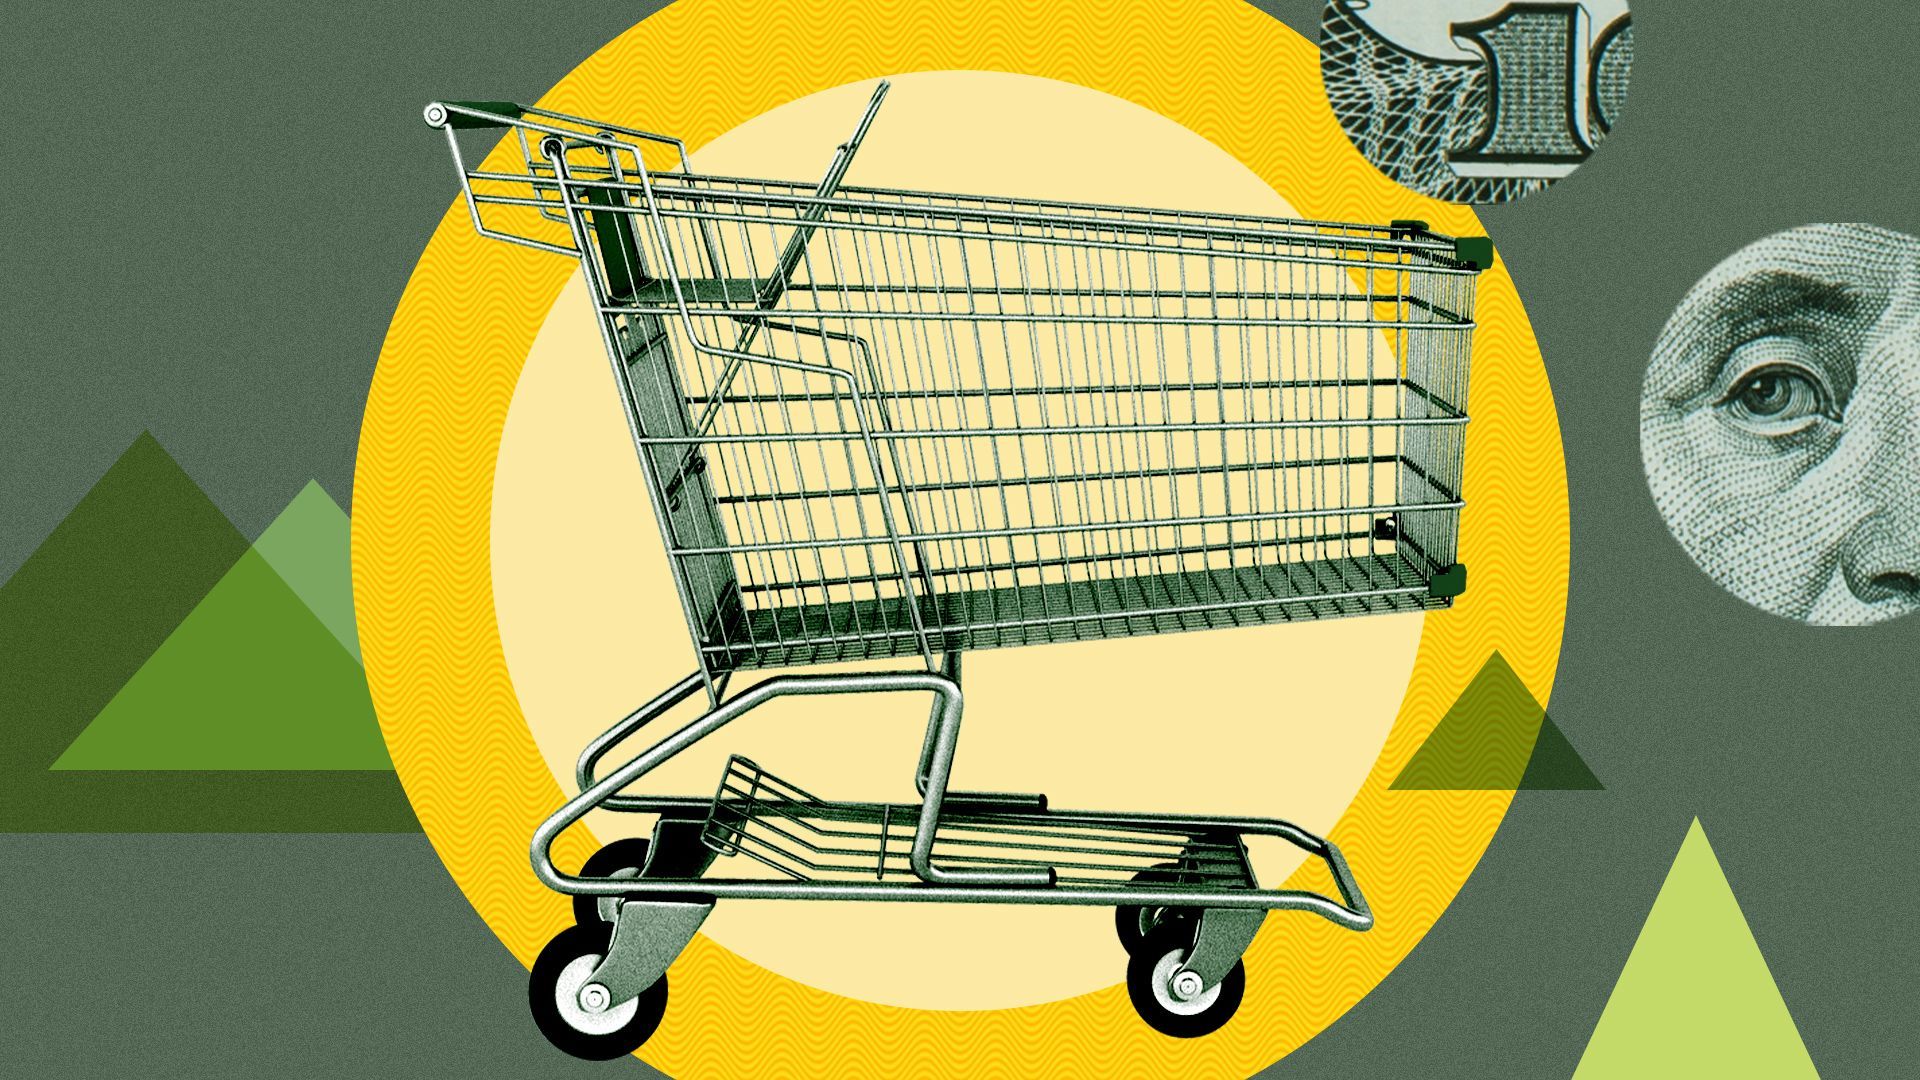 Illustration of a shopping cart surrounded by shapes and money.